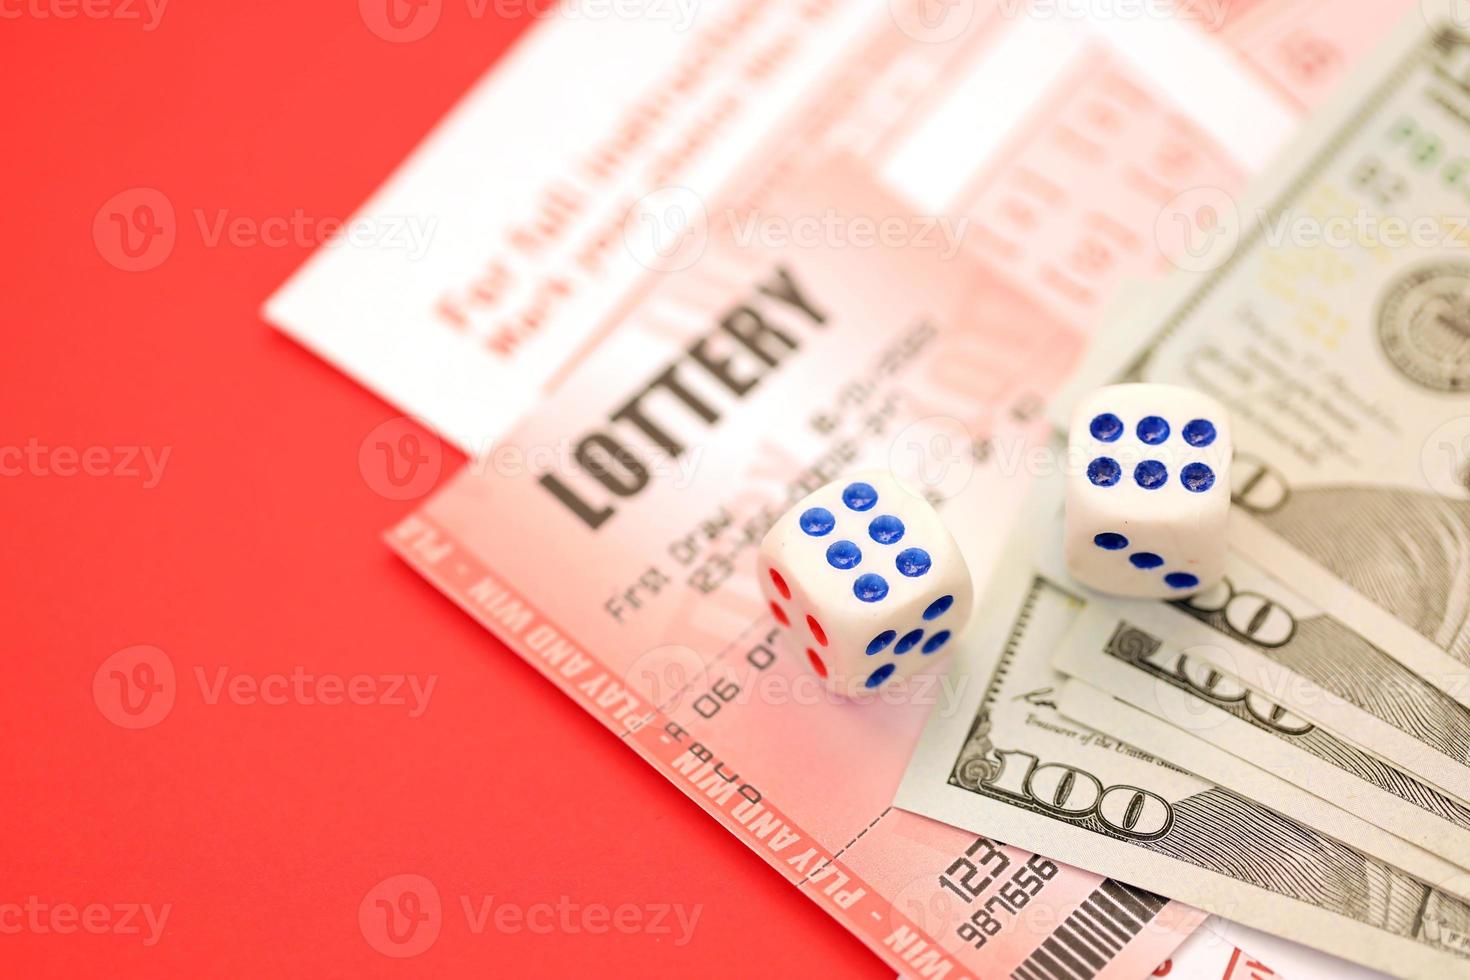 Red lottery ticket with dice and money lies on pink gambling sheets with numbers for marking to play lottery. Lottery playing concept or gambling addiction. Close up photo